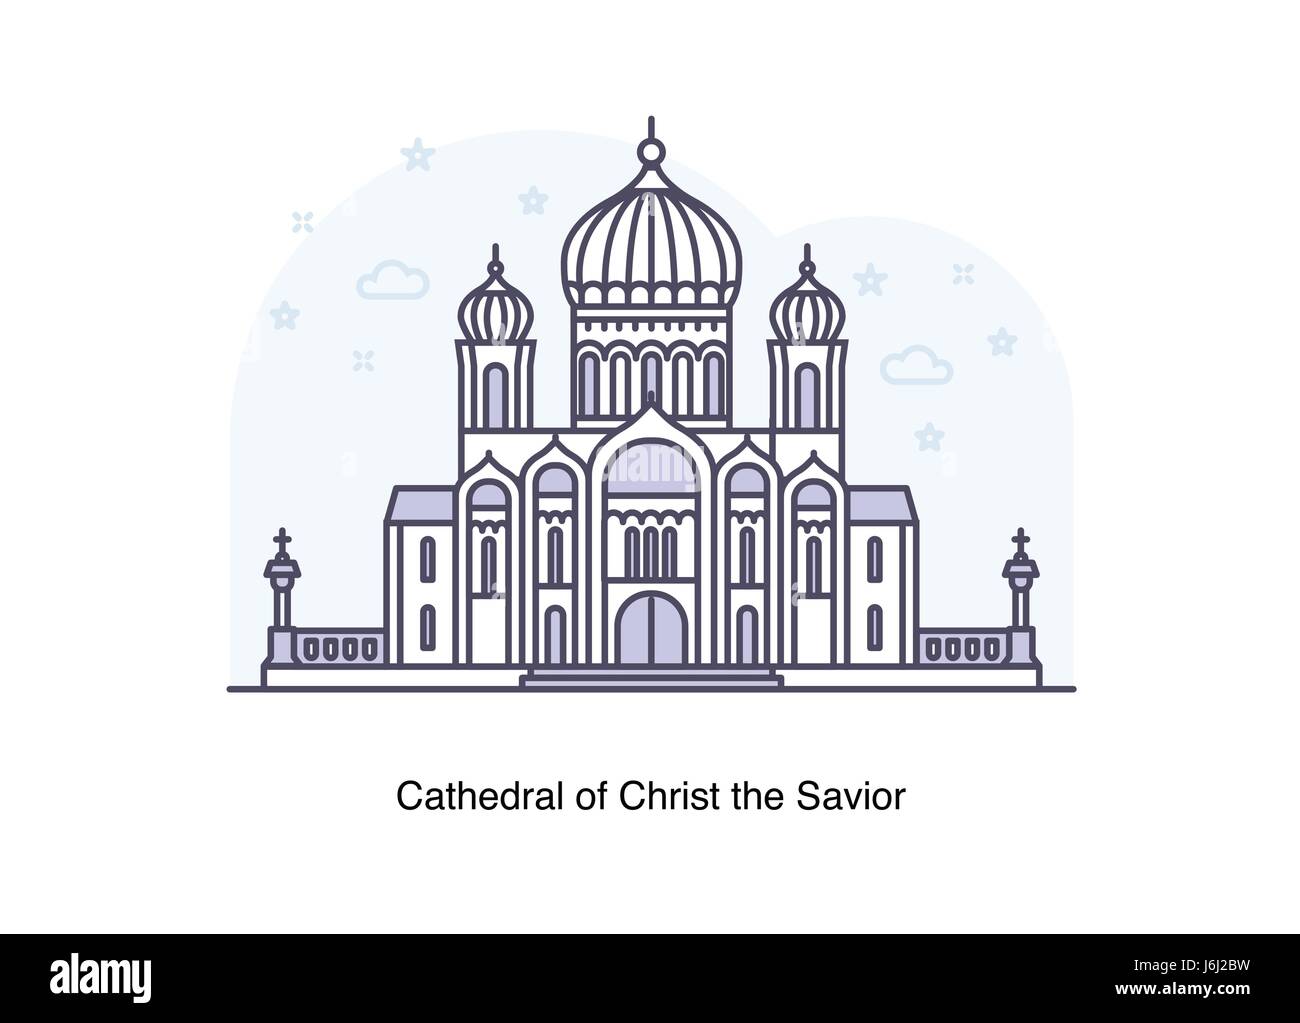 Cathedral of Christ the Savior, Moscow. Line illustration. Stock Vector